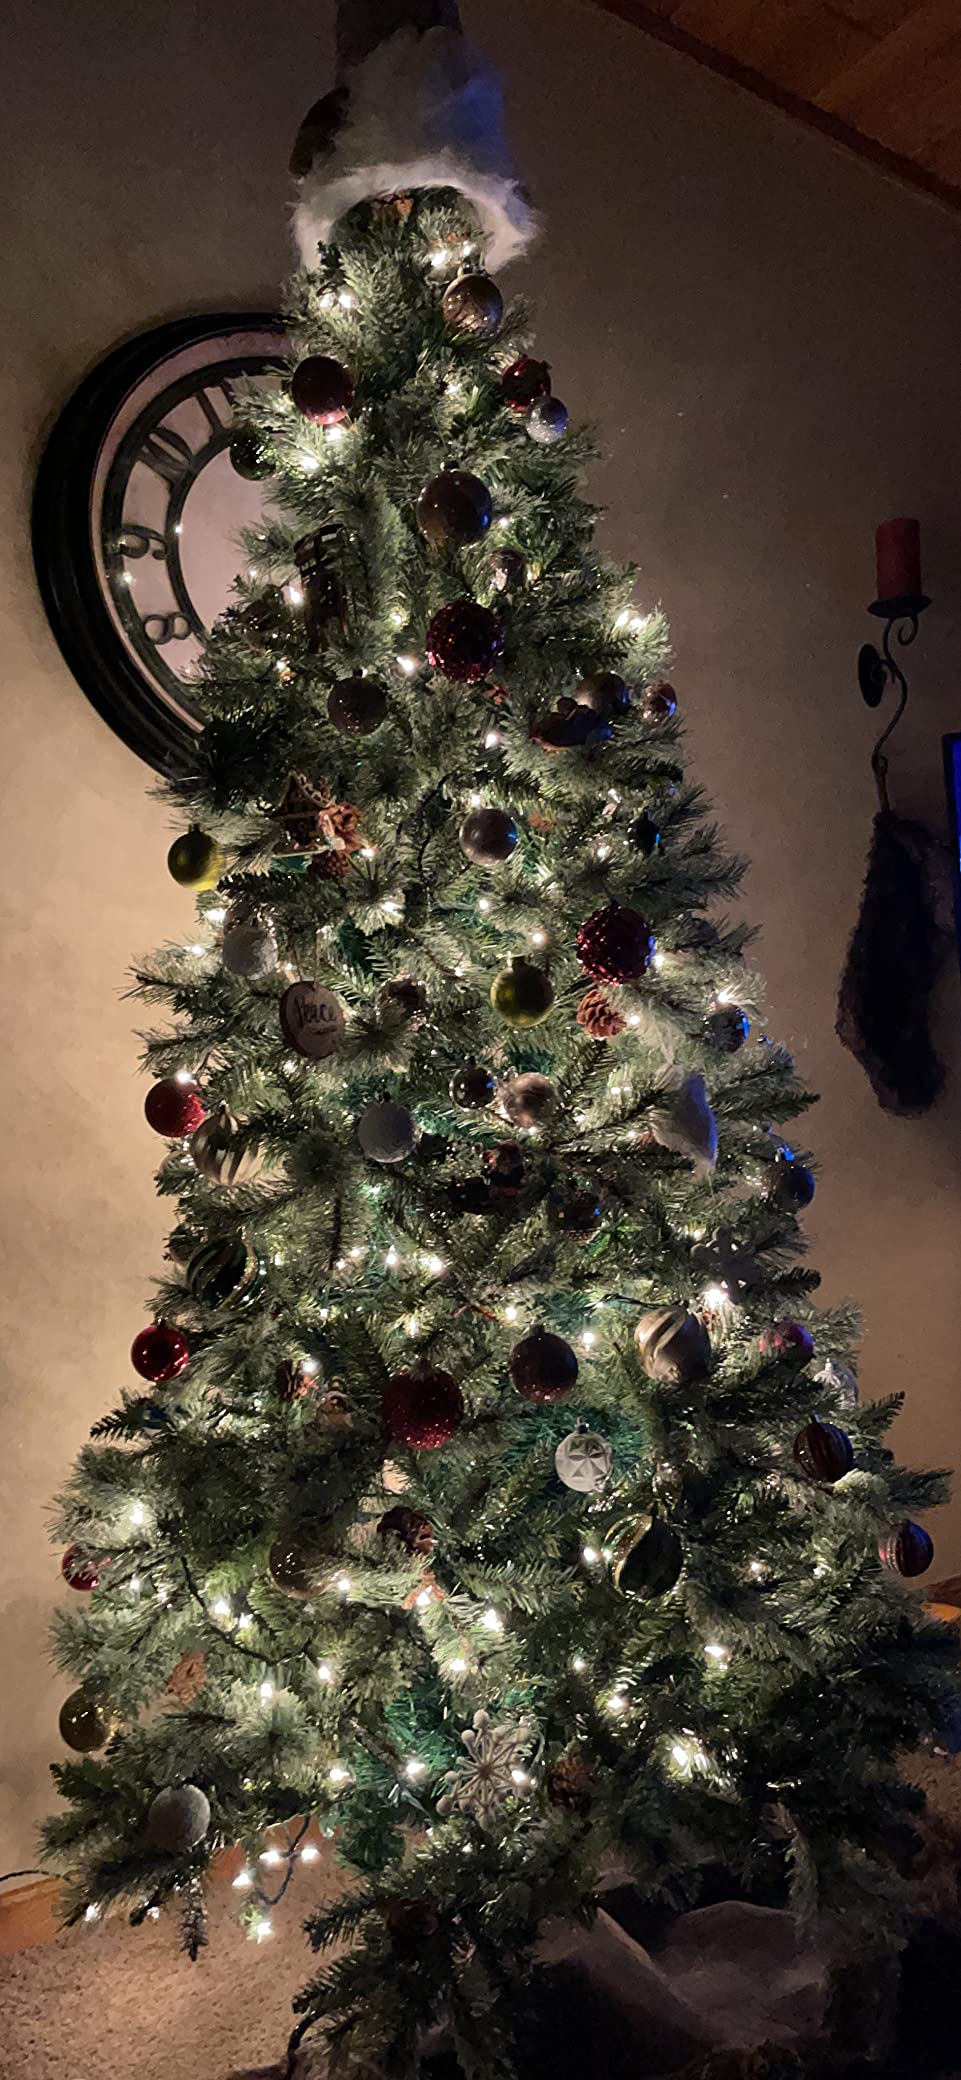 Overall great tree!